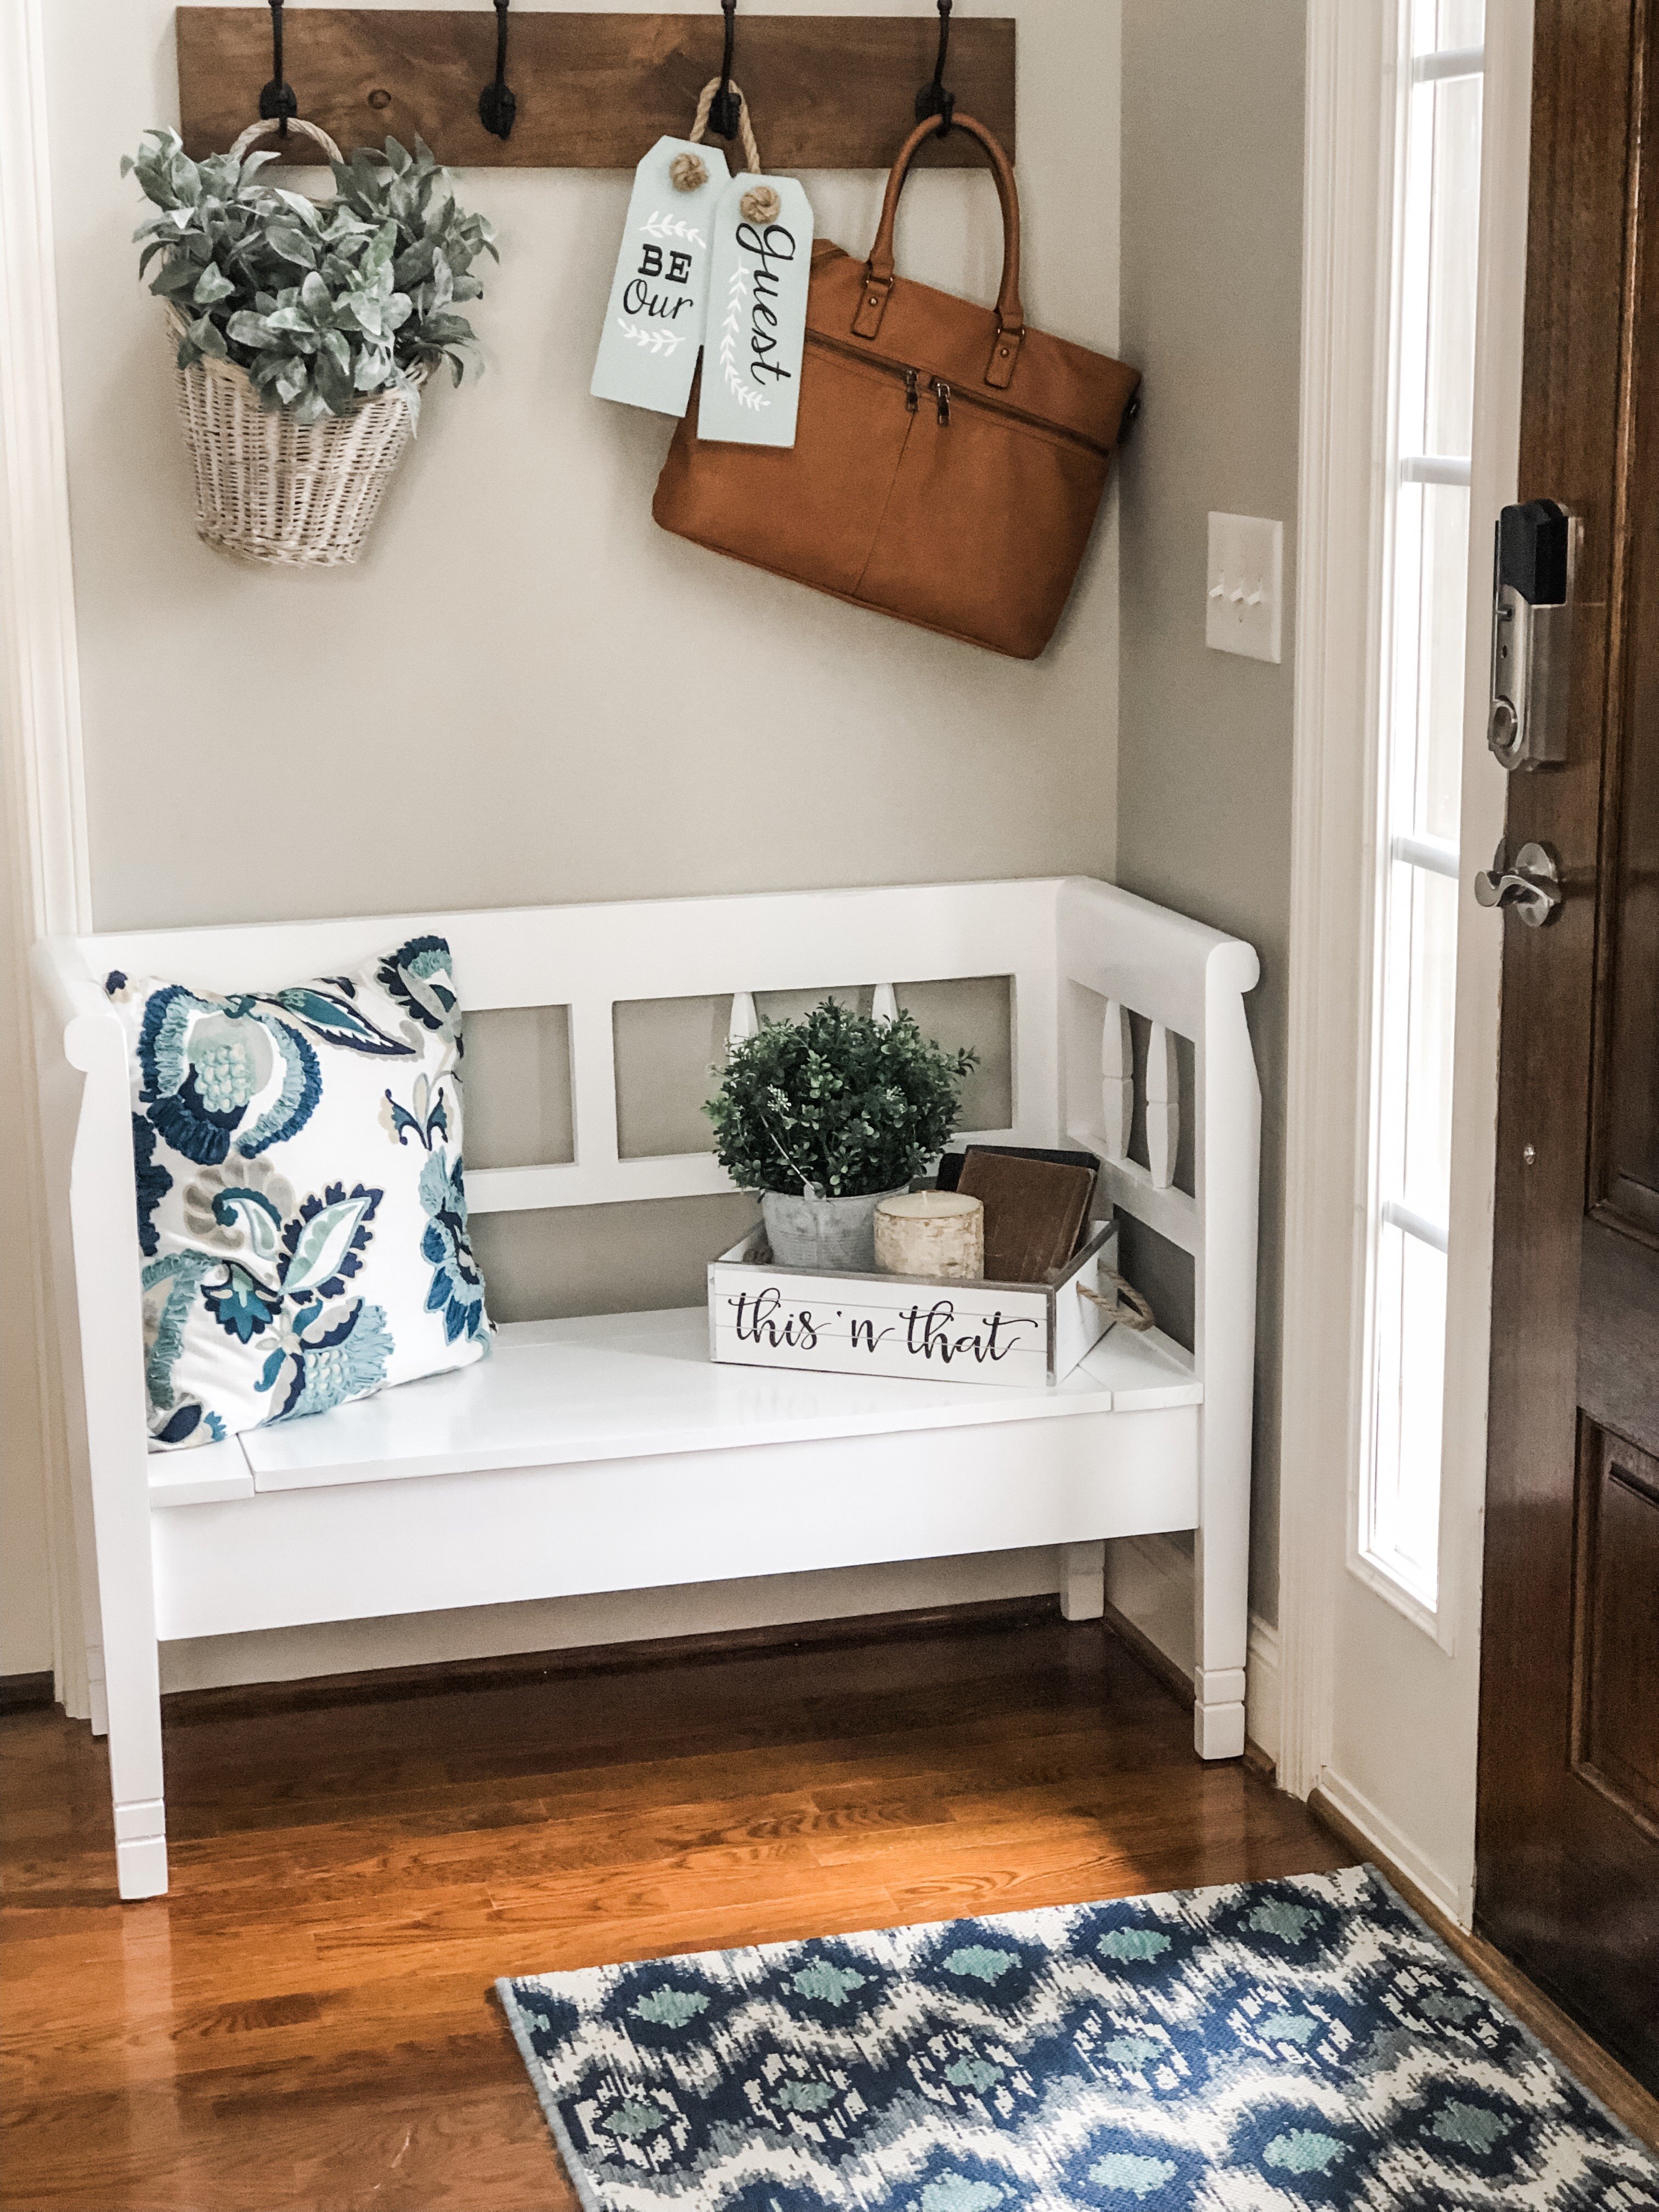 Entry Way Decorating Ideas With A Storage Bench Decor And Hooks